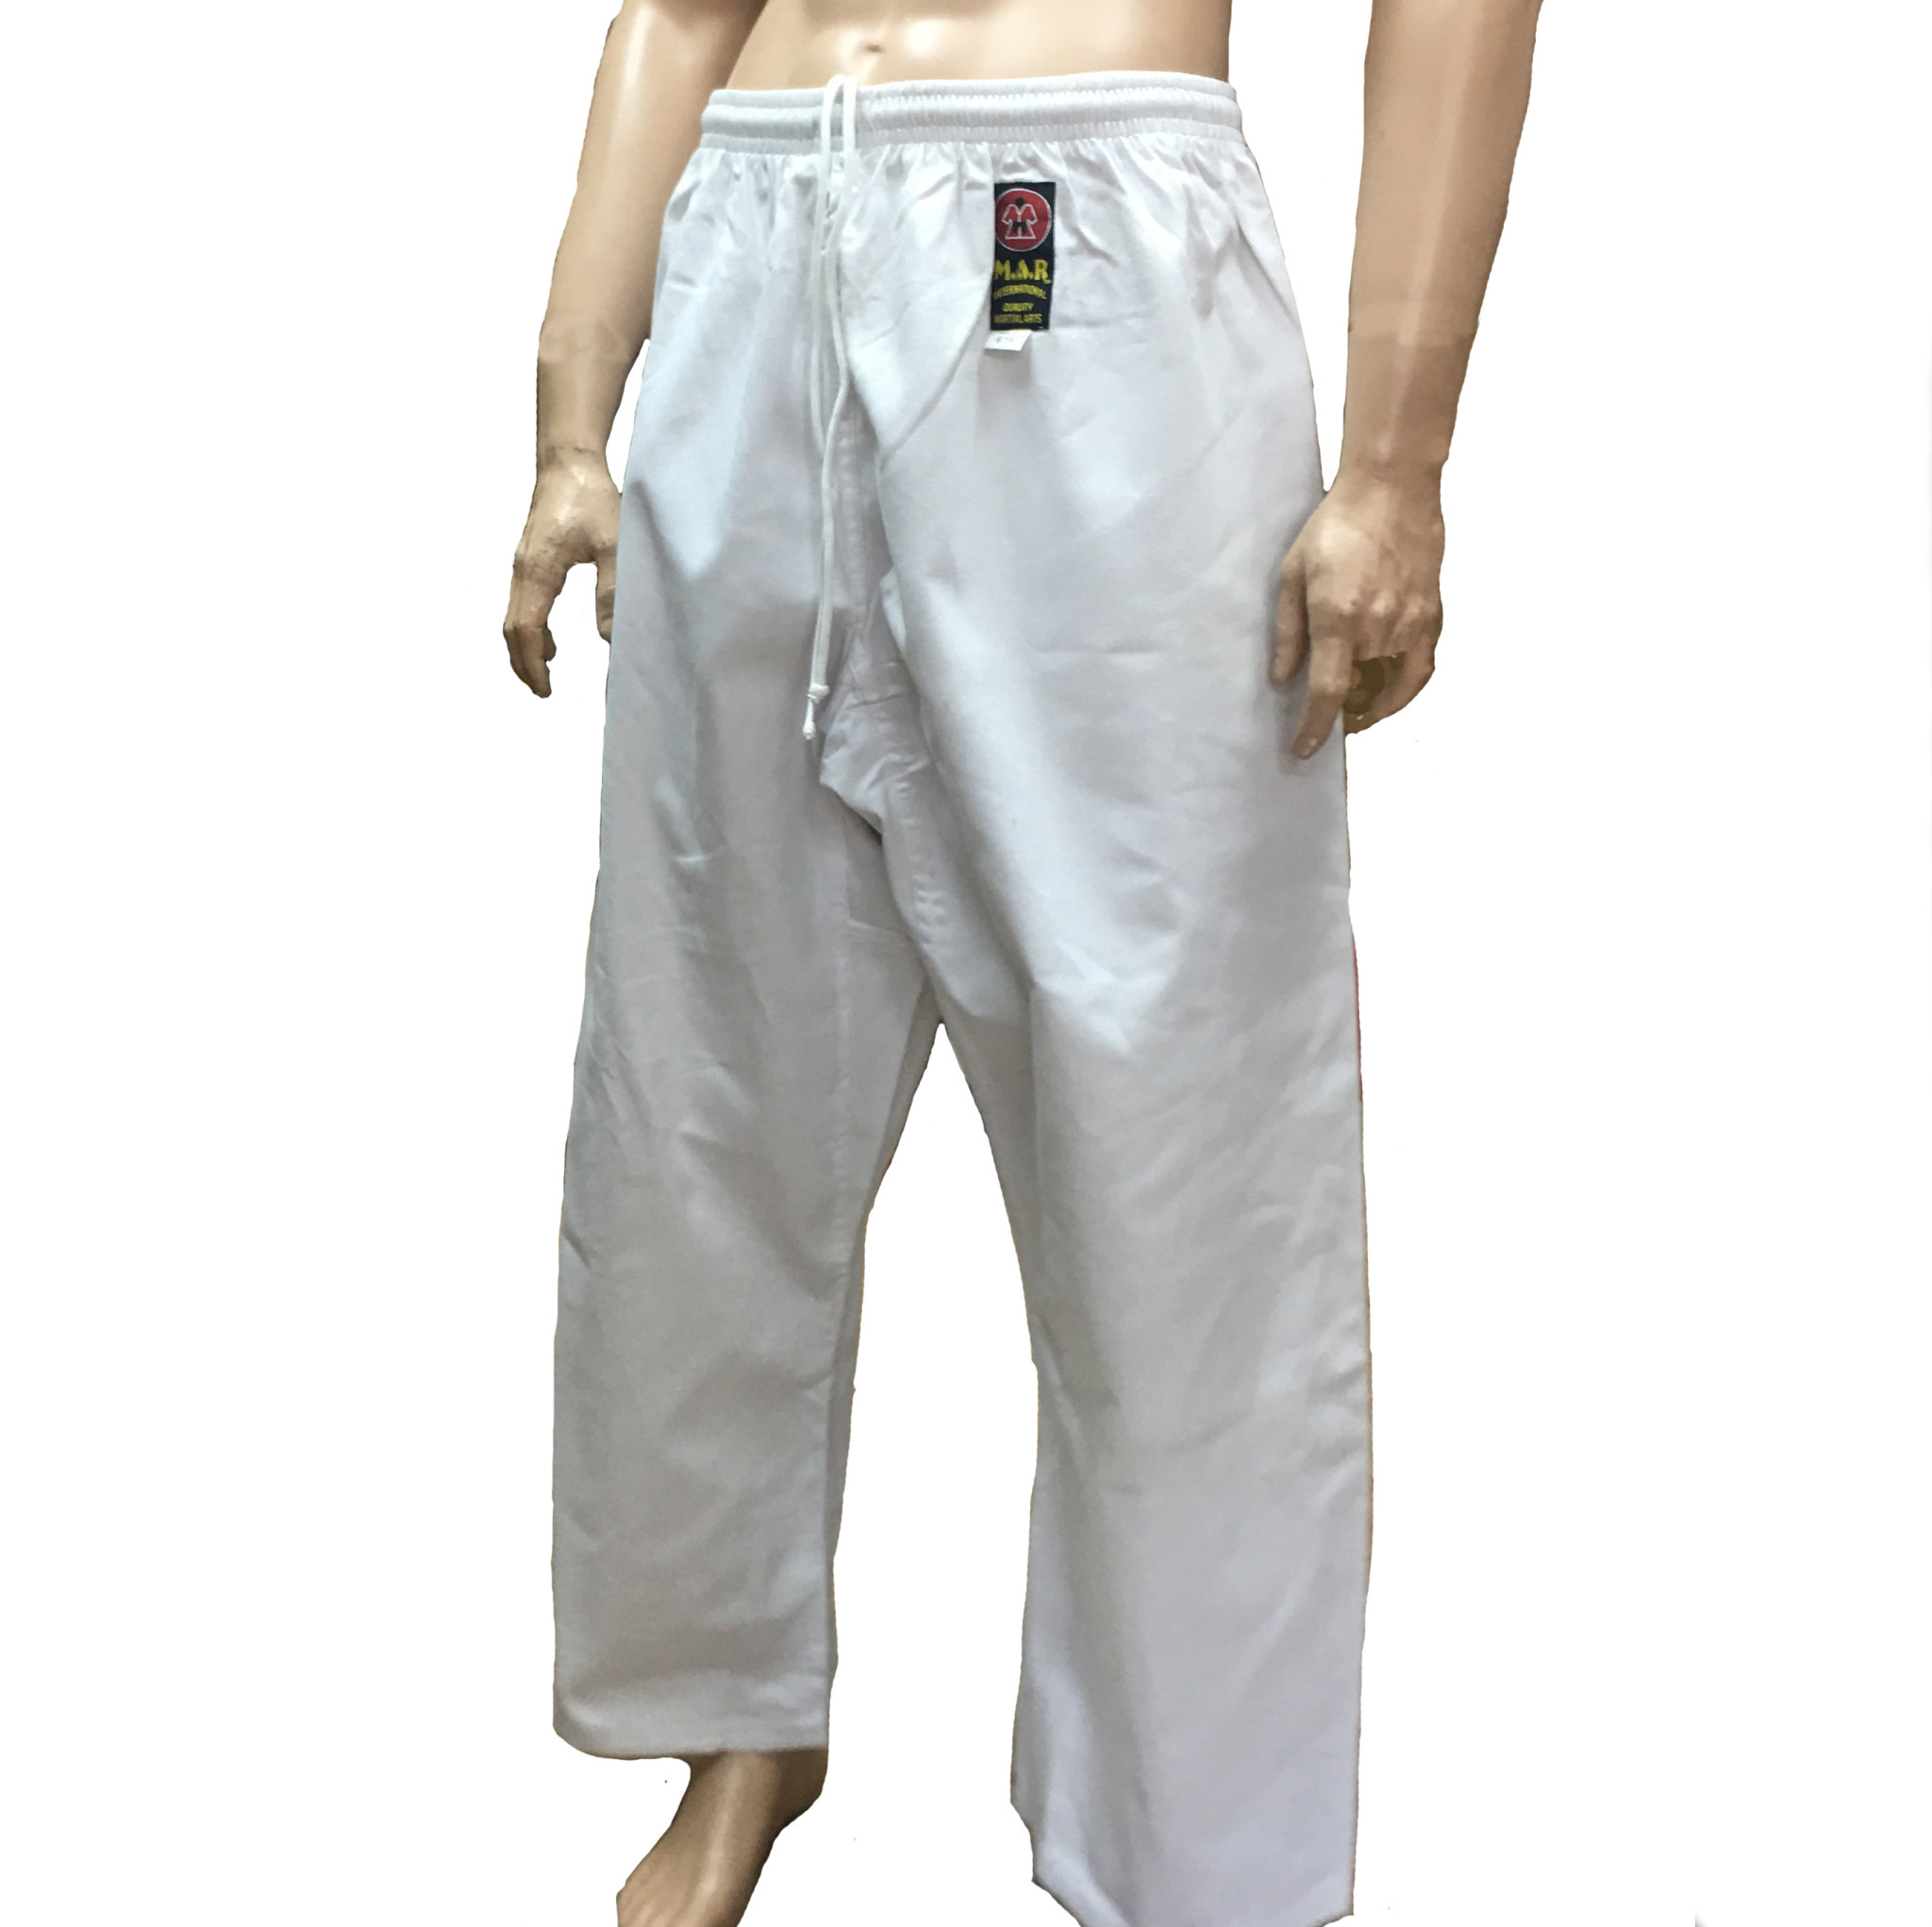 White Karate Trousers are perfect for Martial Arts Training - Enso ...